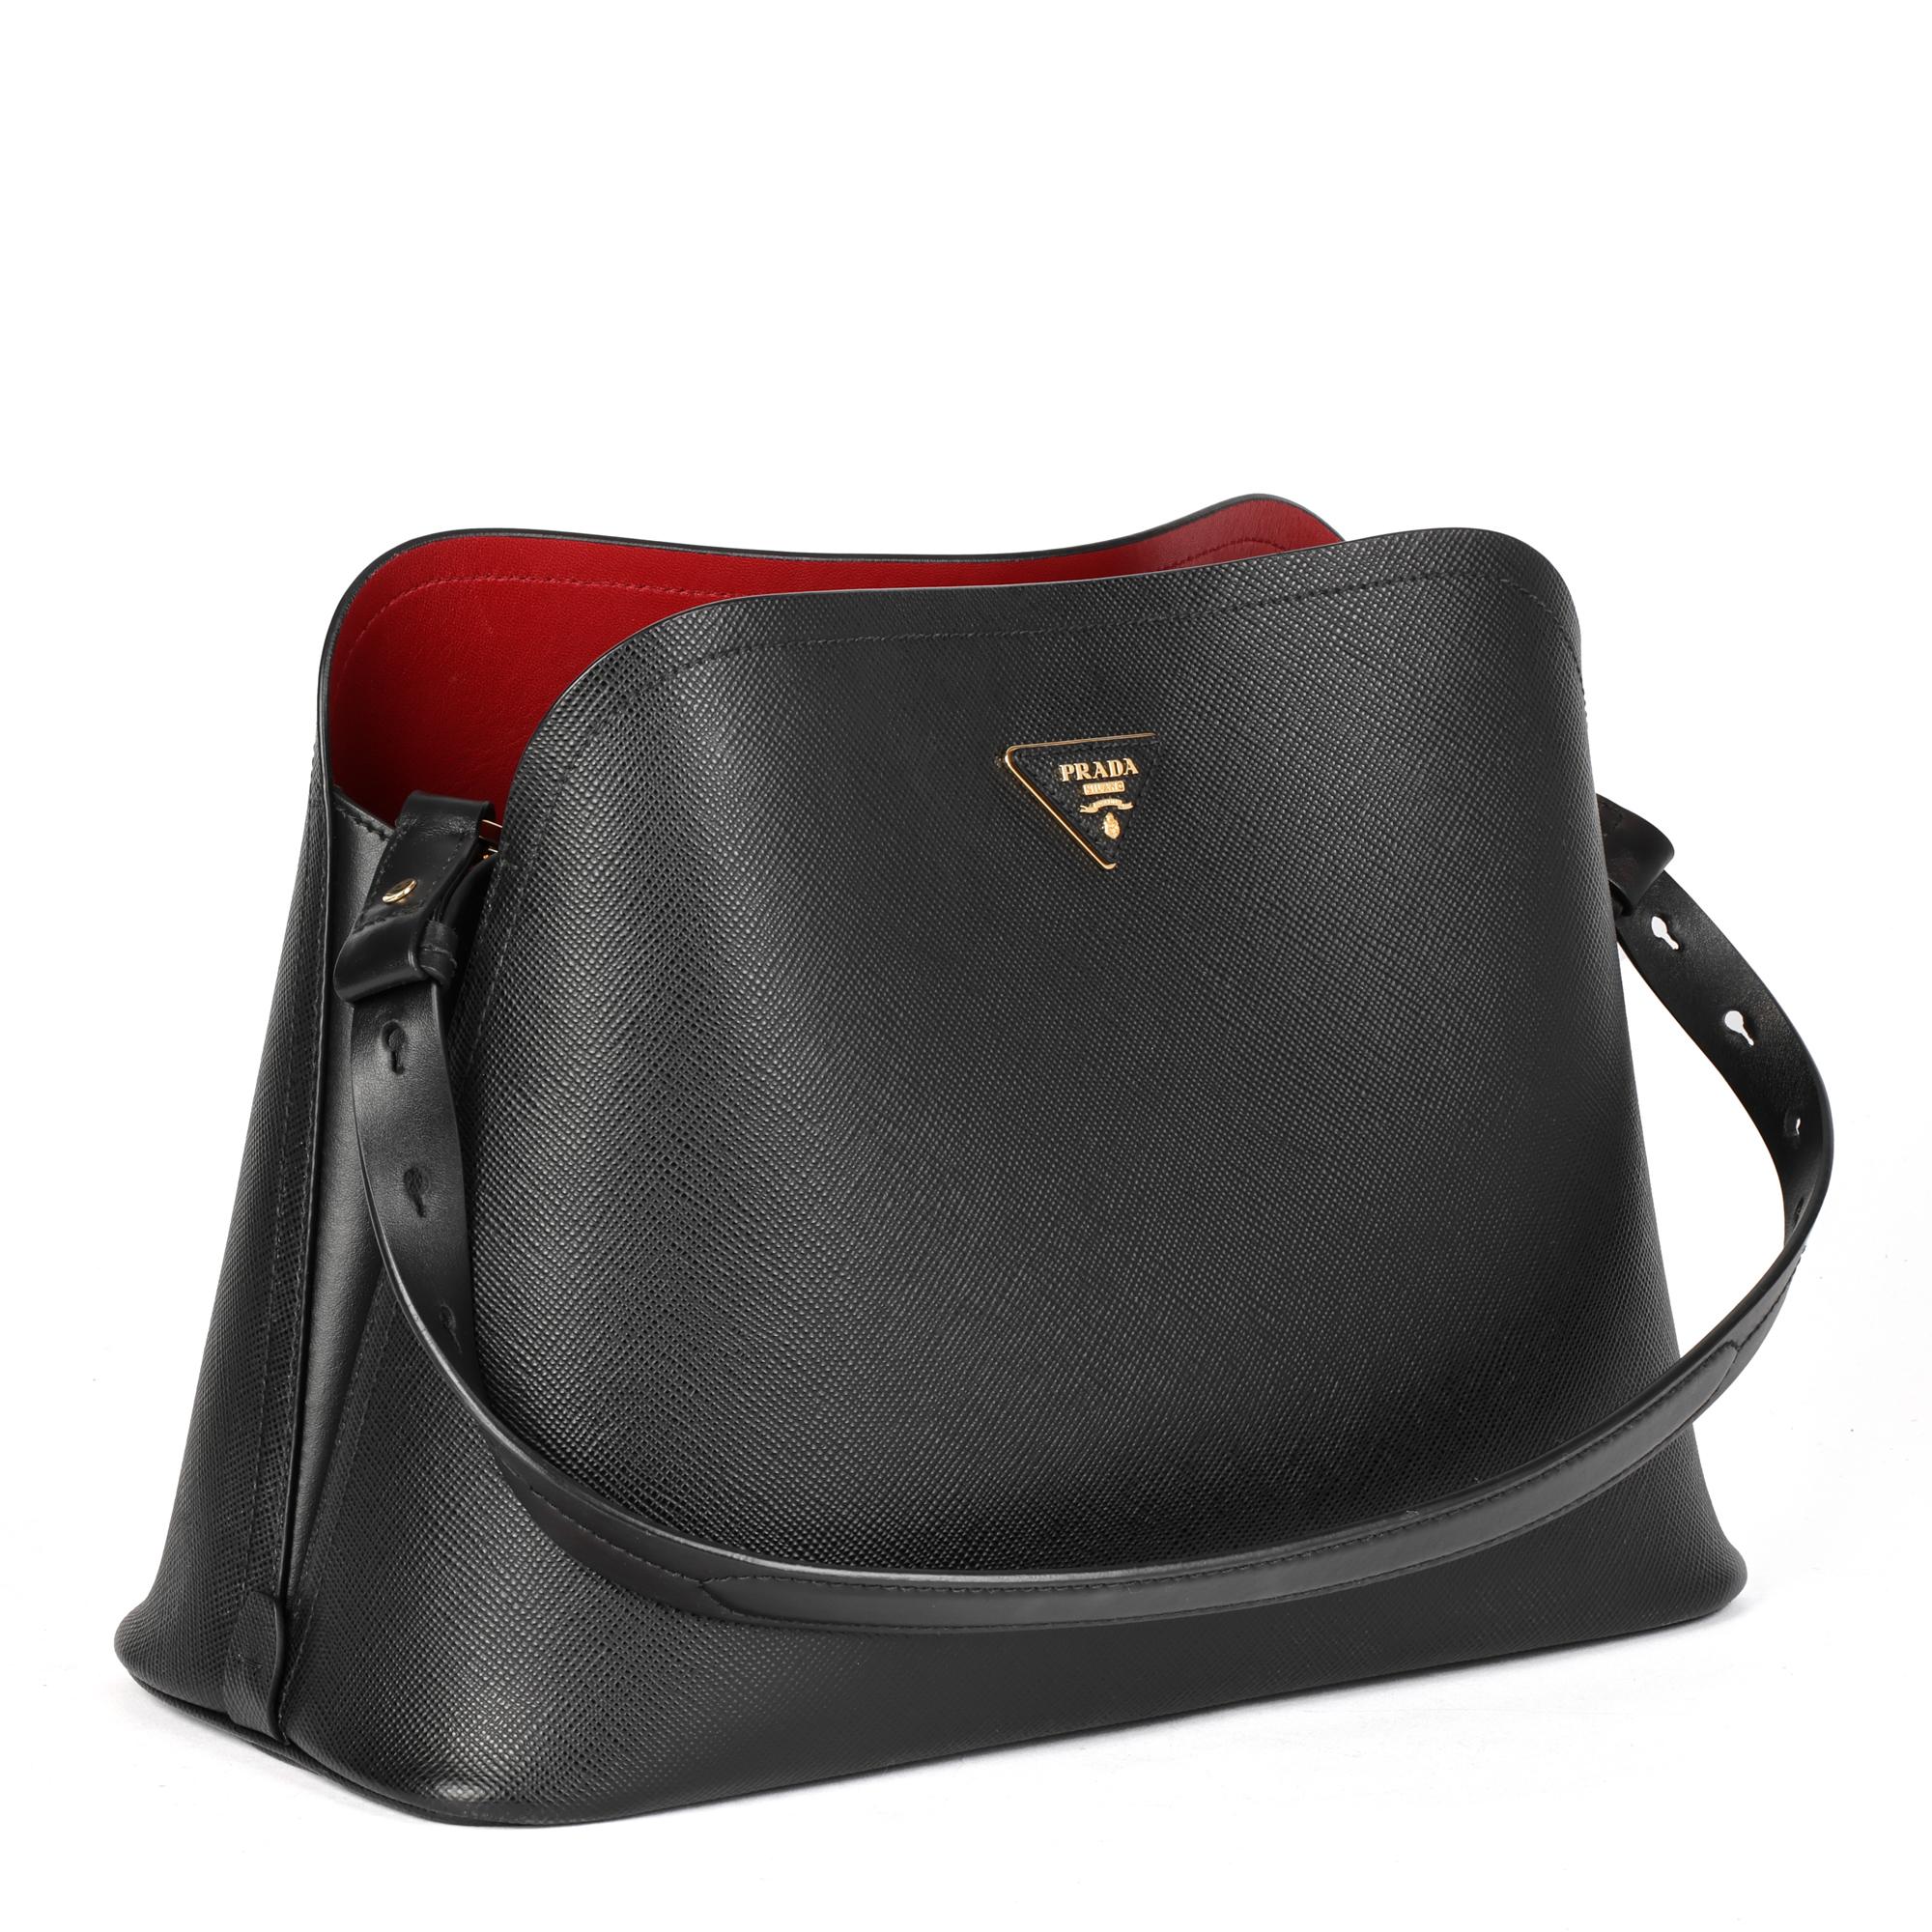 PRADA
Black Saffiano Leather Matinée Bag

Xupes Reference: CB664
Serial Number: 180
Age (Circa): 2019
Accompanied By: Prada Dust Bag, Authenticity Card, Clochette, Luggage Tag
Authenticity Details: Date Stamp (Made in Italy)
Gender: Ladies
Type: